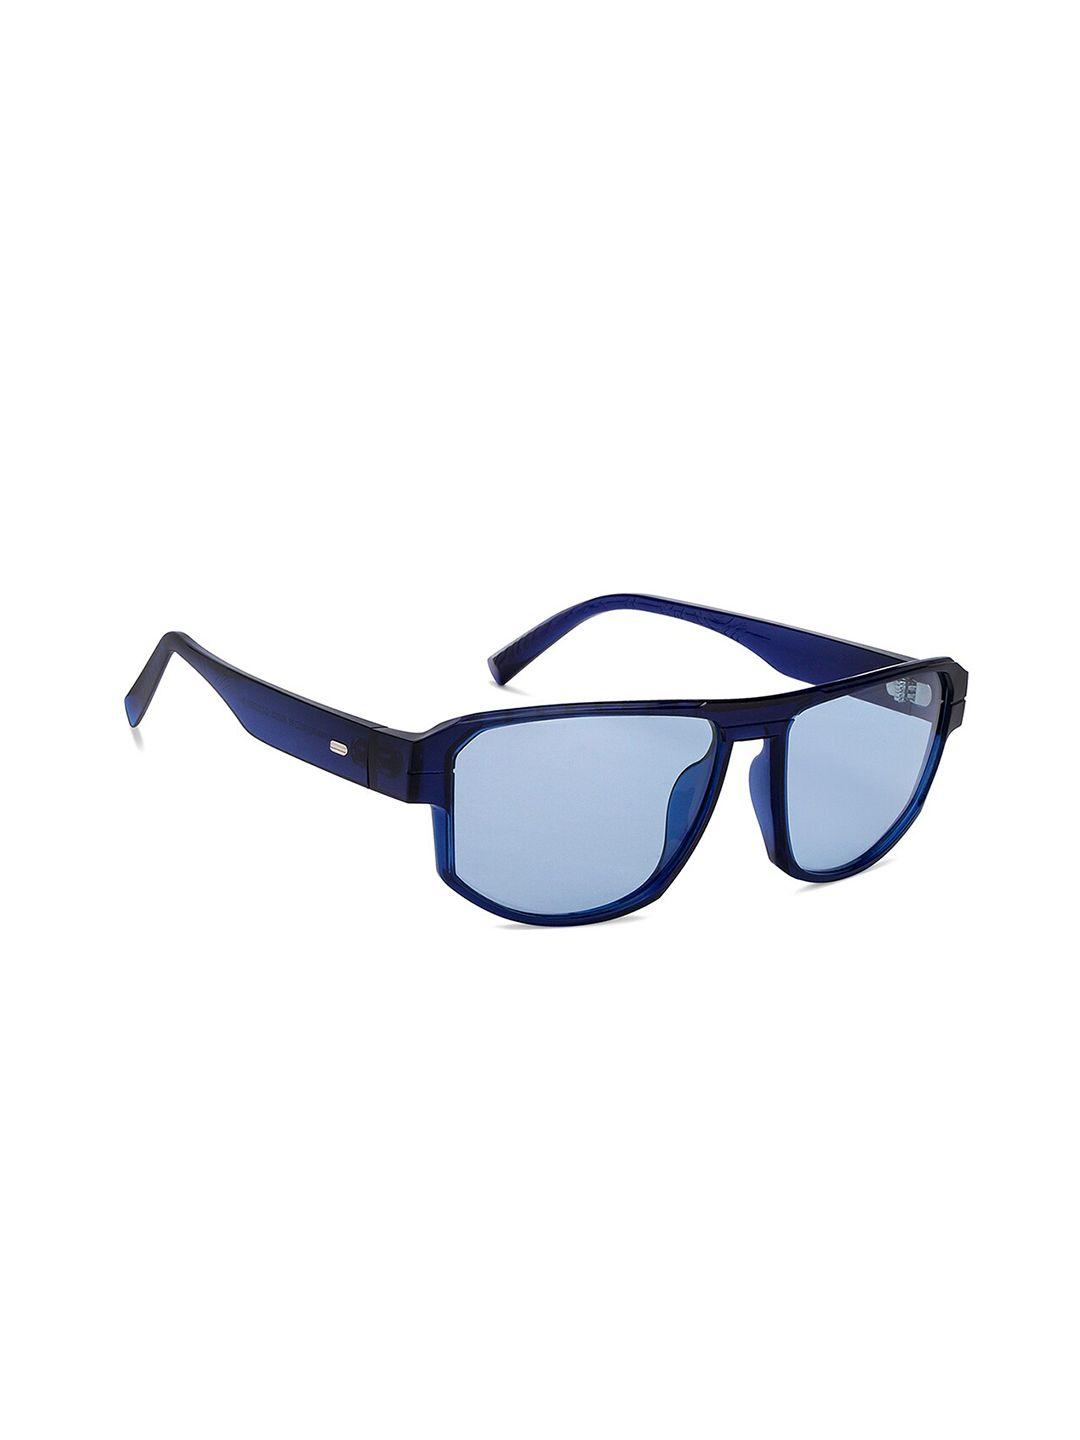 vincent chase lens & other sunglasses with polarised & uv protected lens